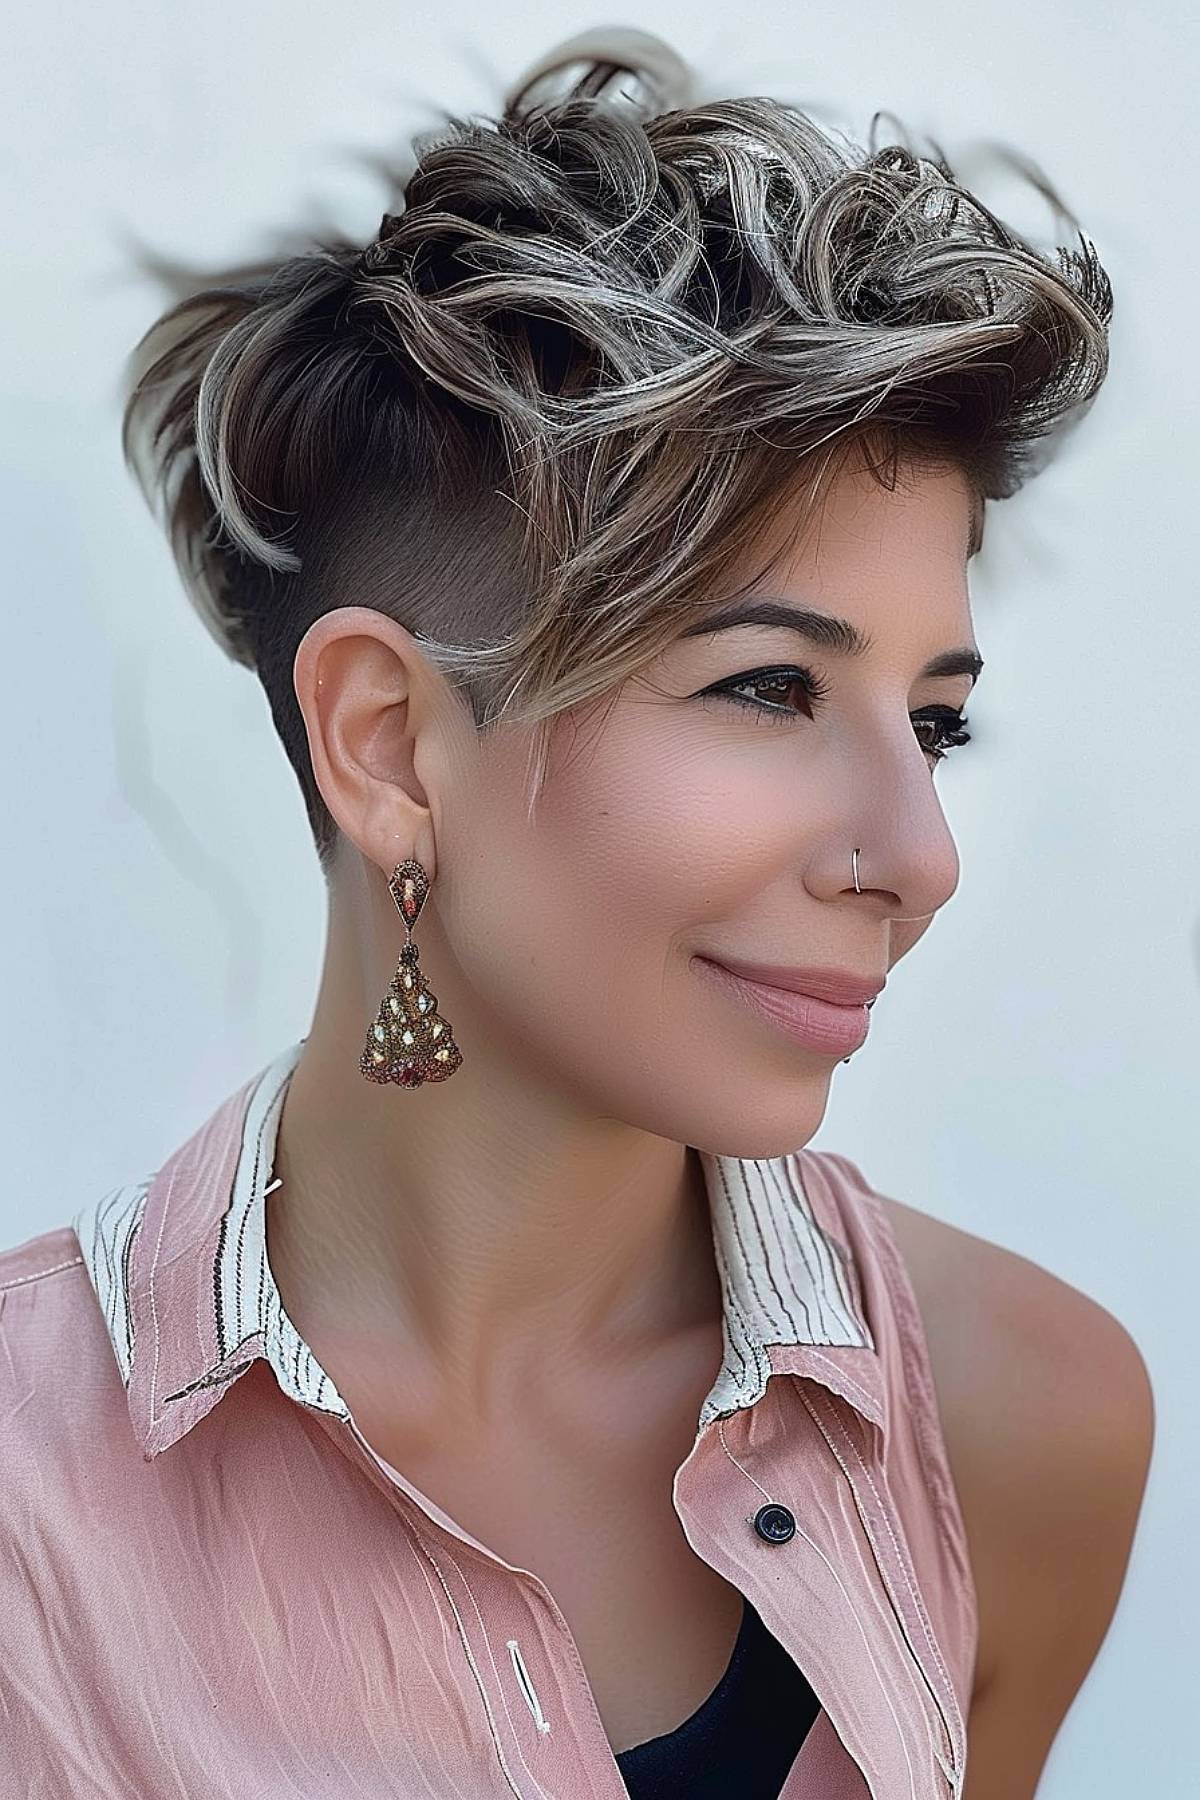 A woman with an angular pixie cut, featuring soft waves on the top of her head and a subtle undercut, combines softness with edge.